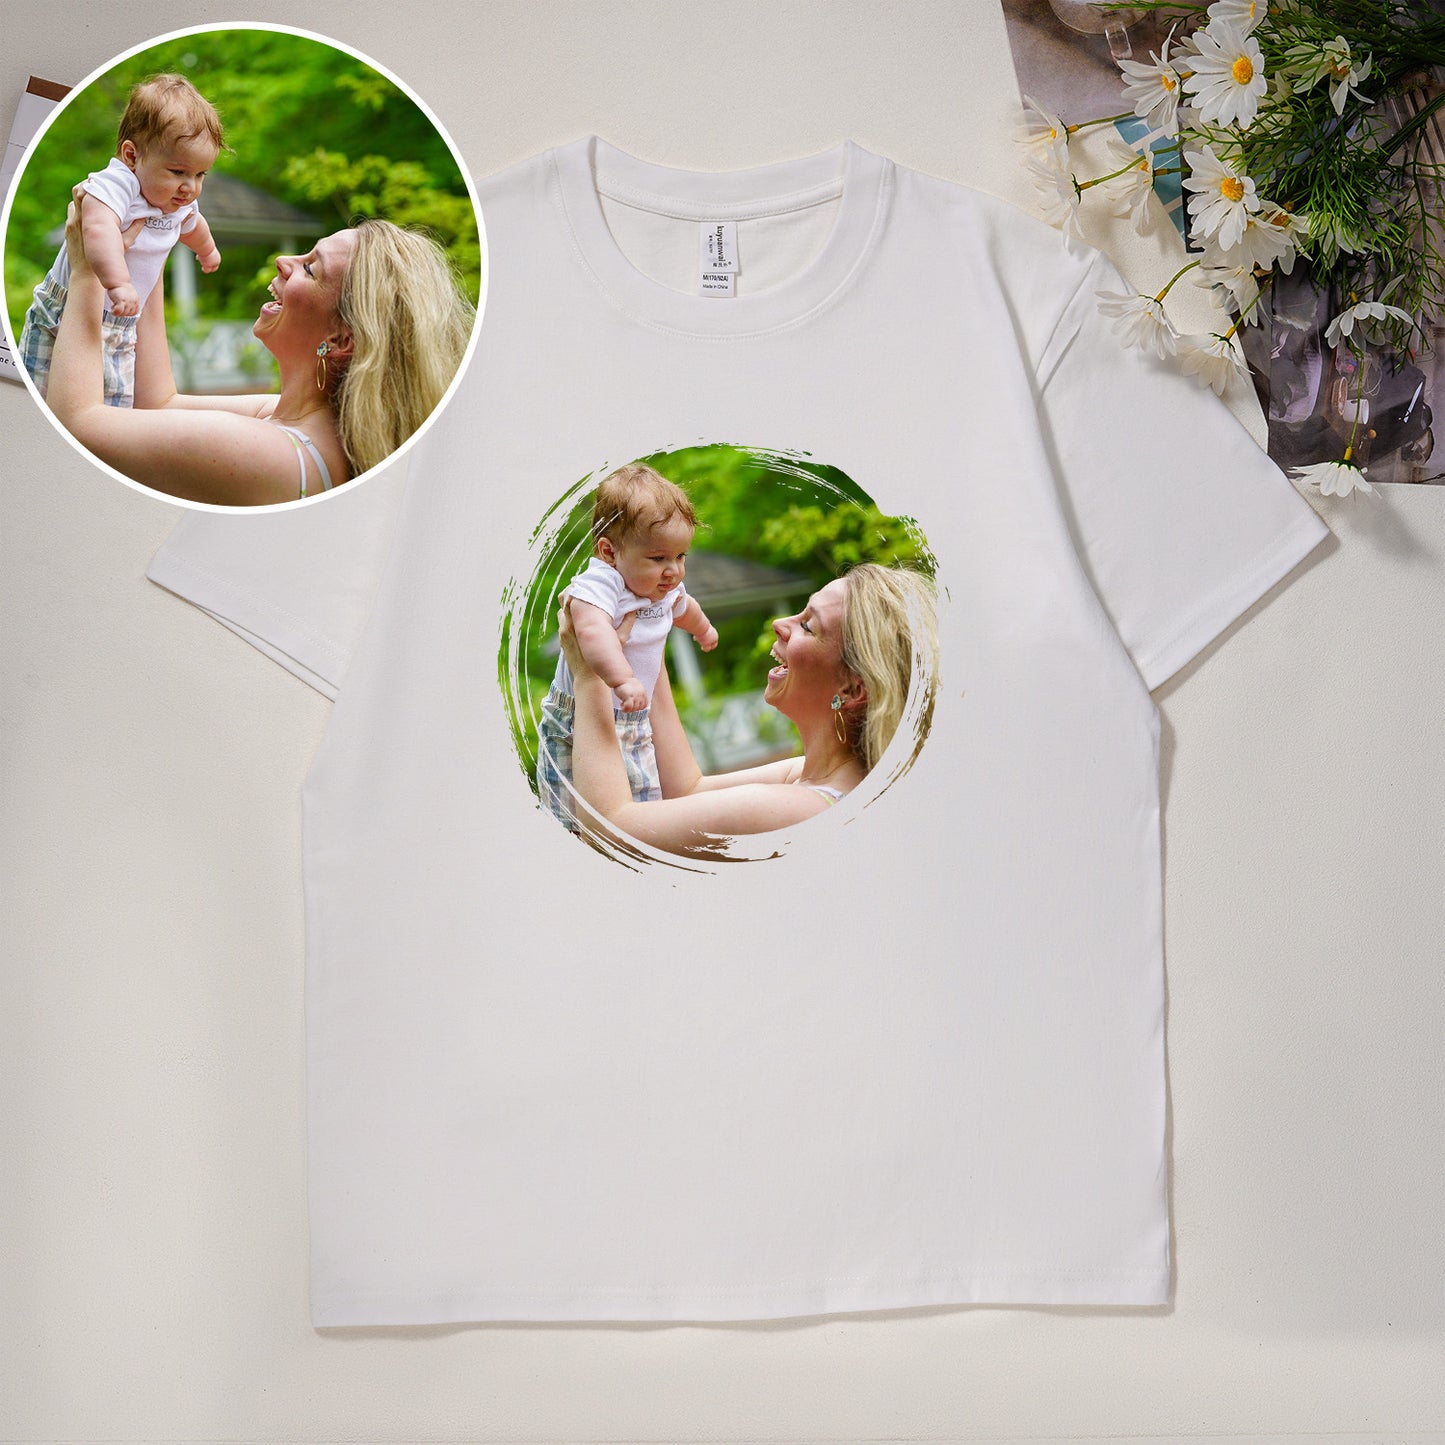 Personalized Photo Print T-Shirt, Stand Out with Vibrant Colors and Memories on Your Tee!